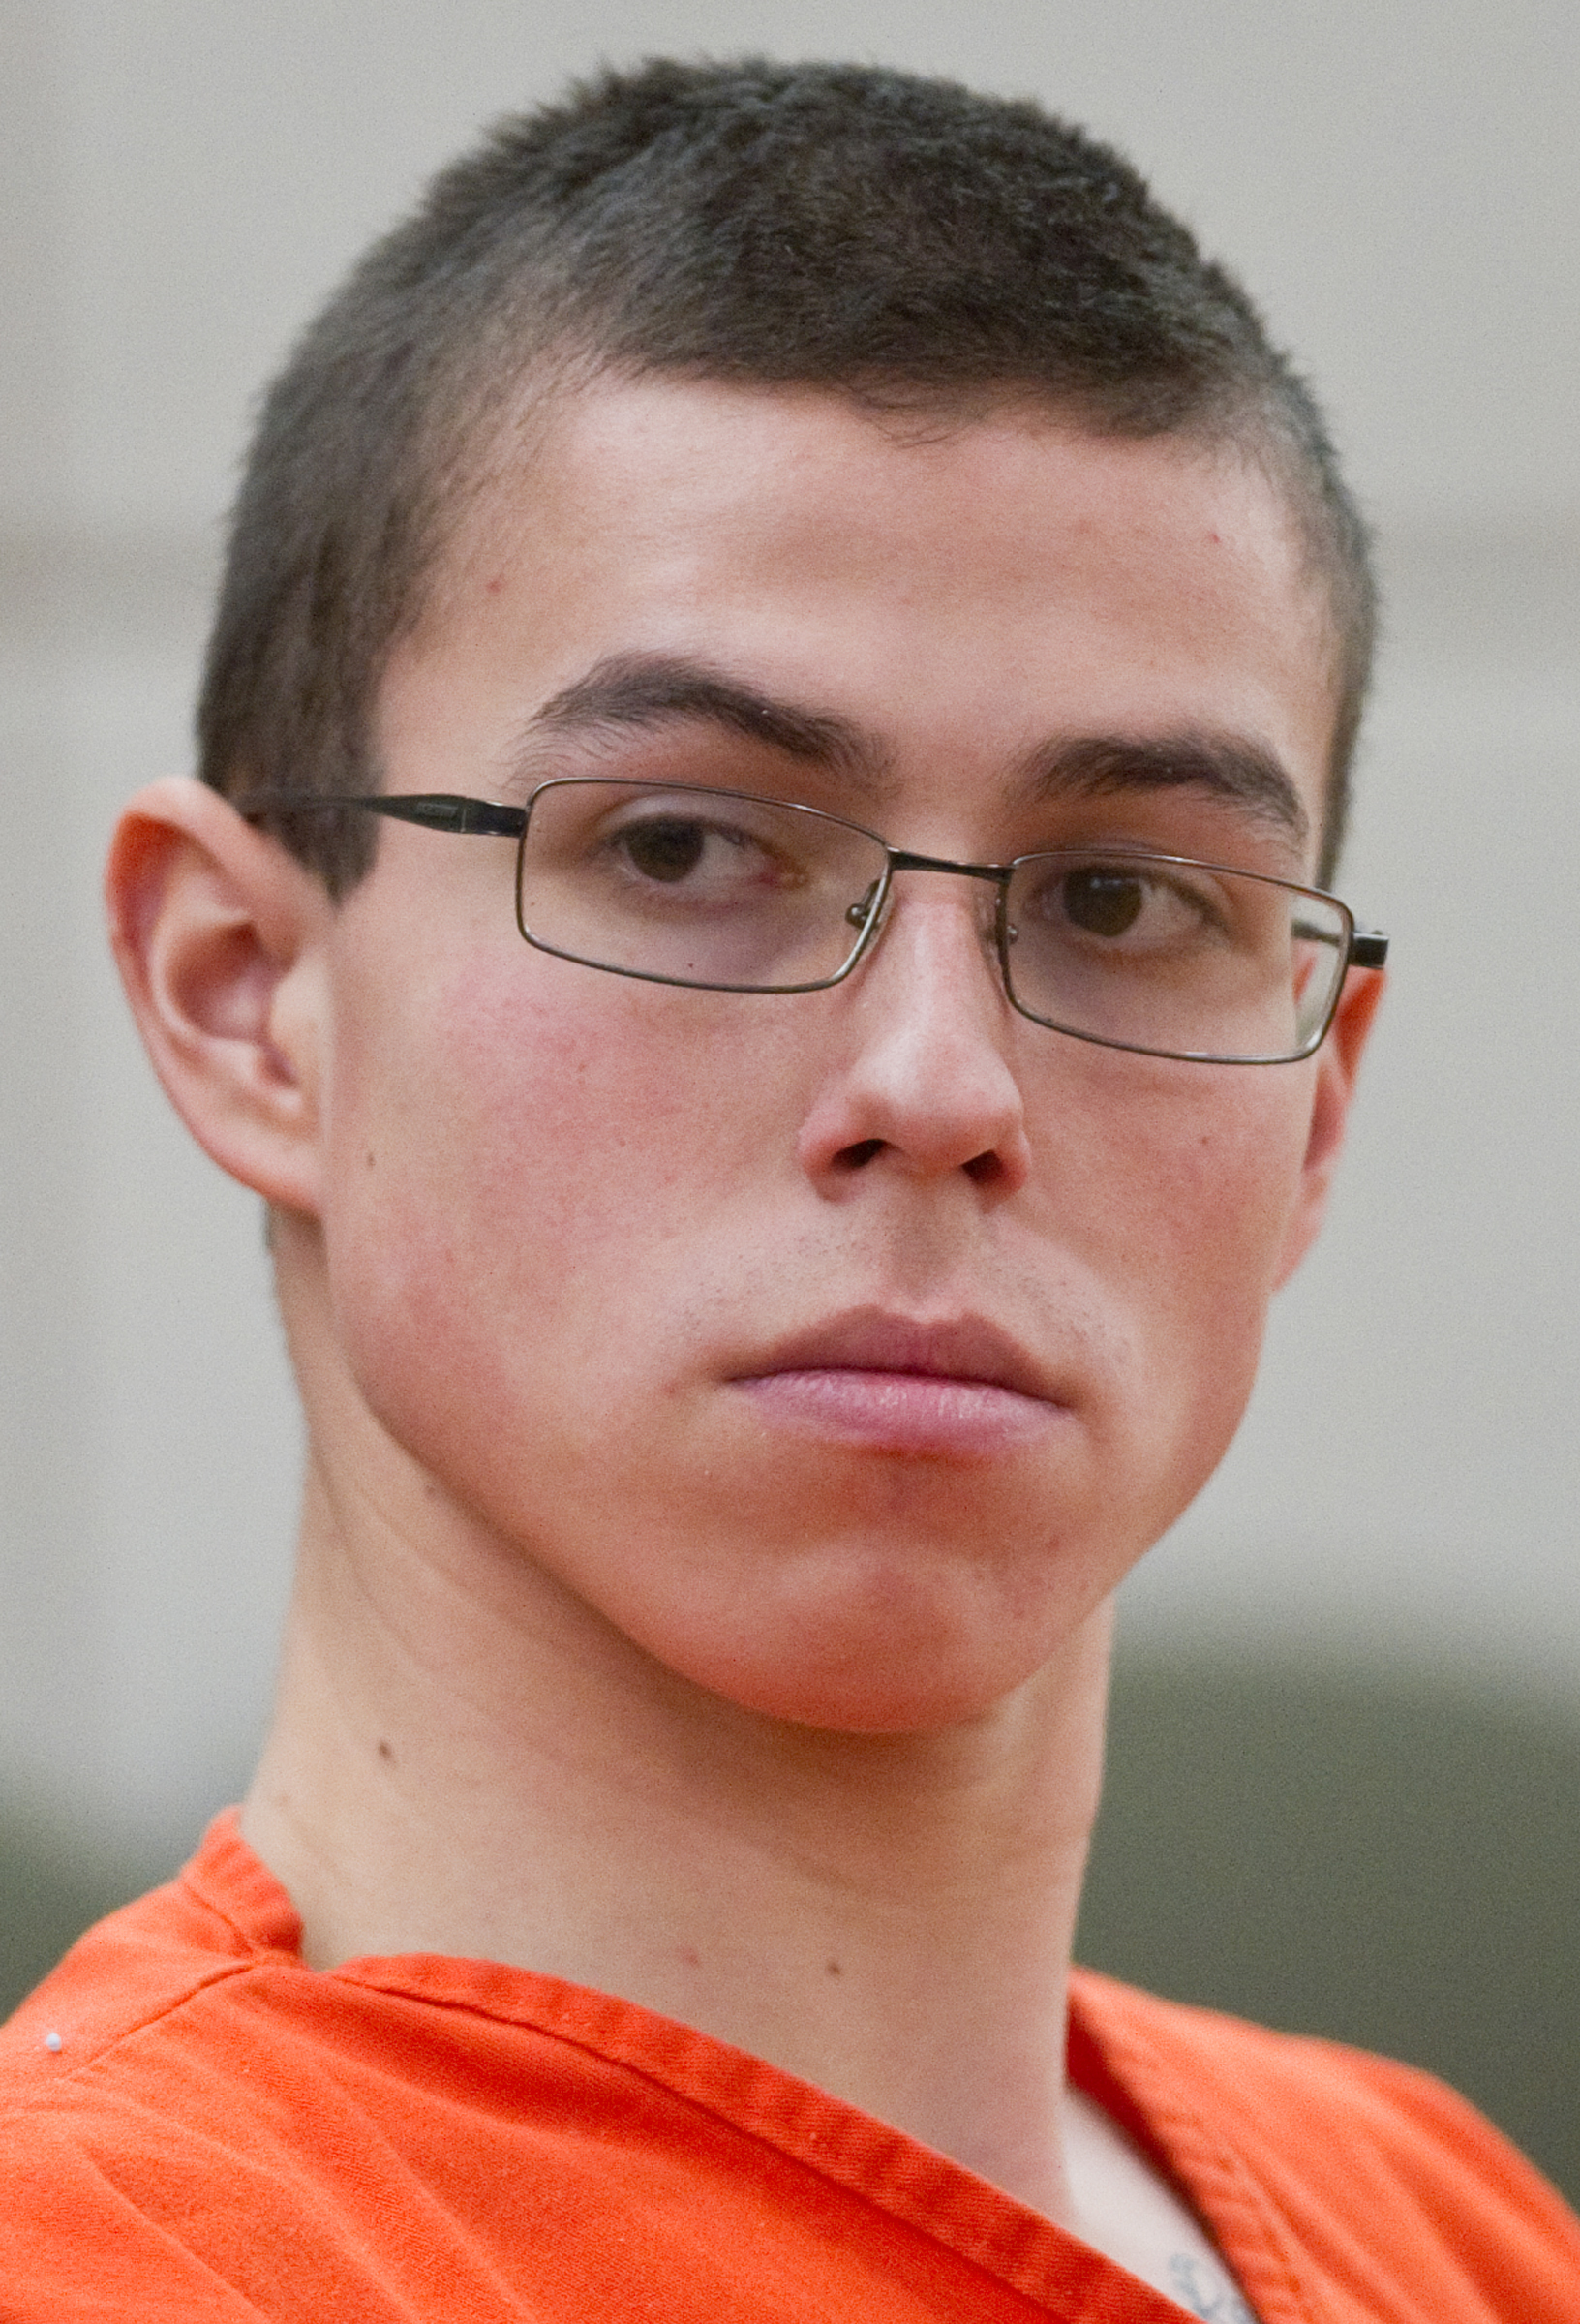 Harris D. Graves, 20, appears in Juneau Superior Court on Nov. 18, 2014, for his arraignment on the felony charge of sexual abuse of a minor in the second degree. (Michael Penn | Juneau Empire File)